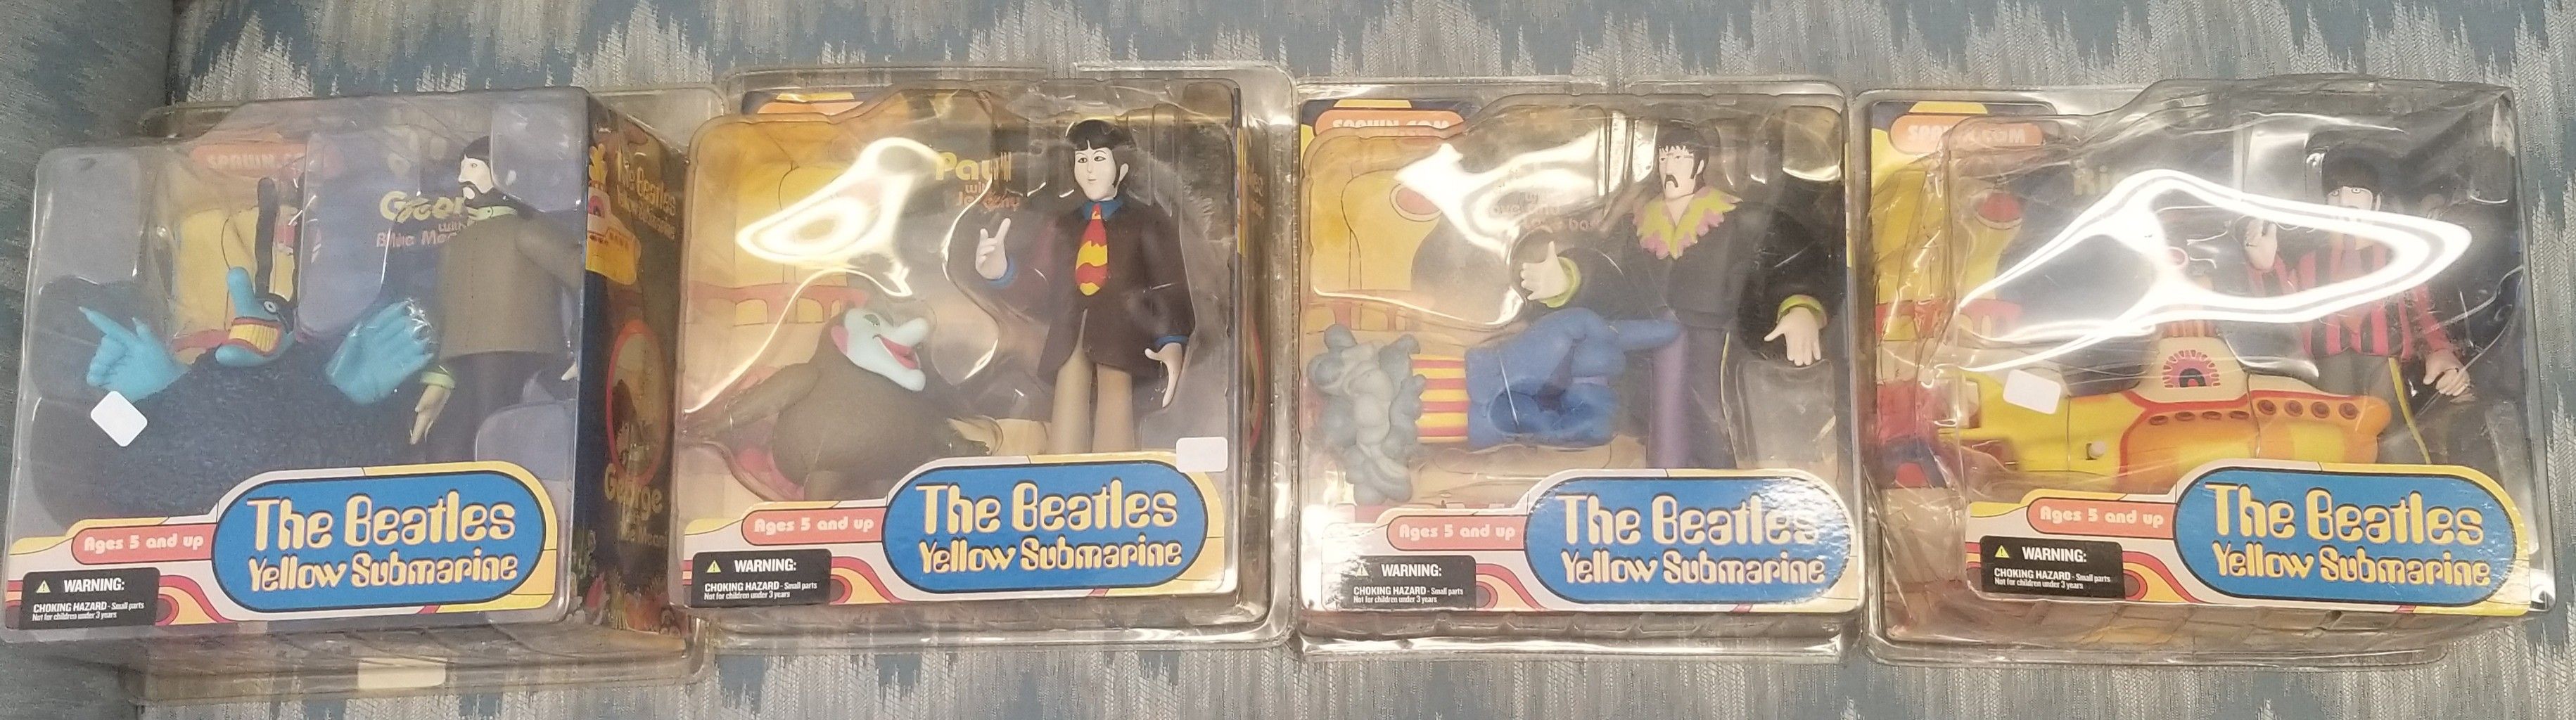 Beatles collectables